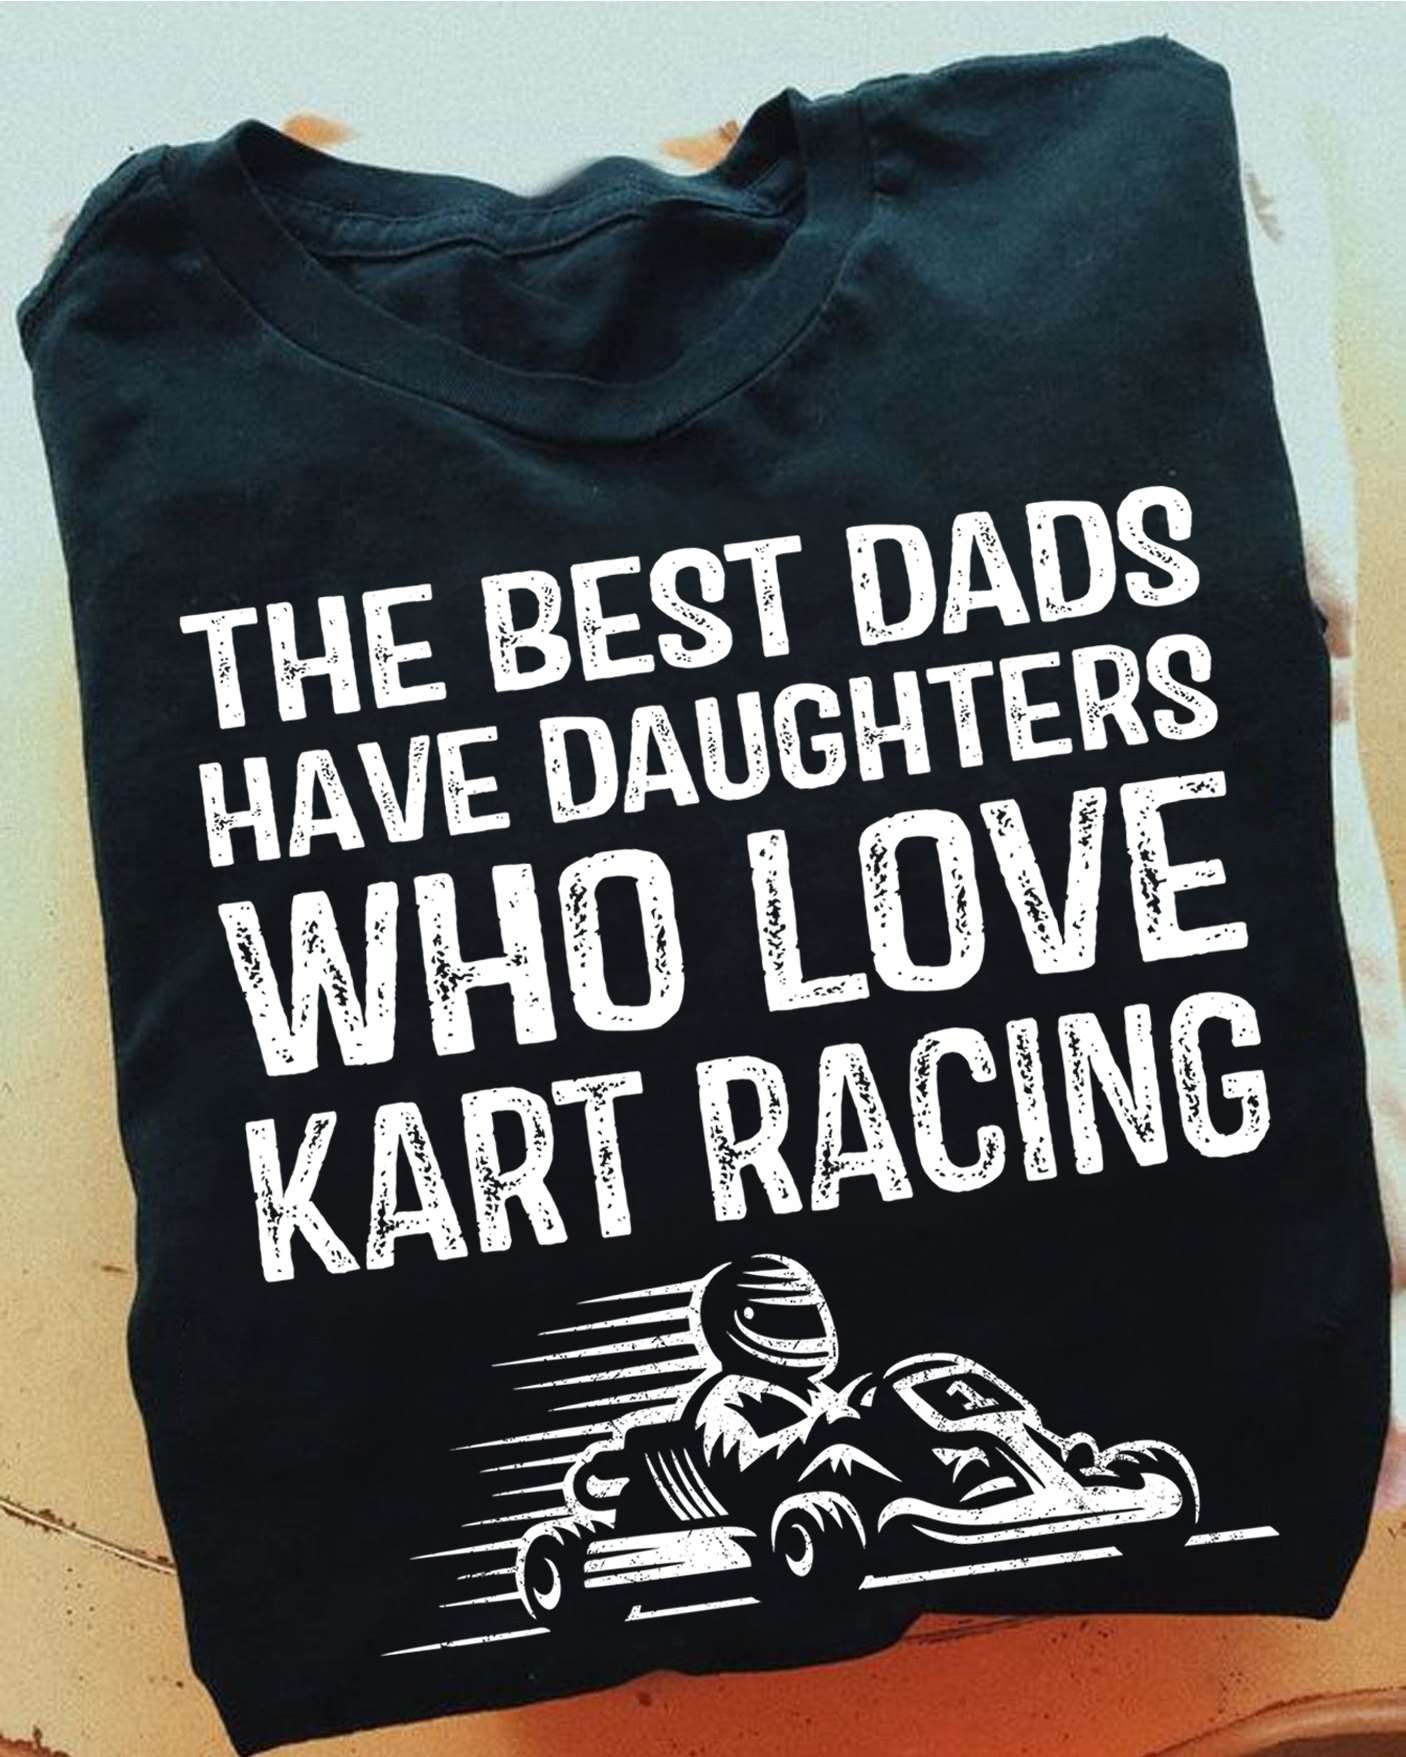 The best dads have daughters who love kart racing